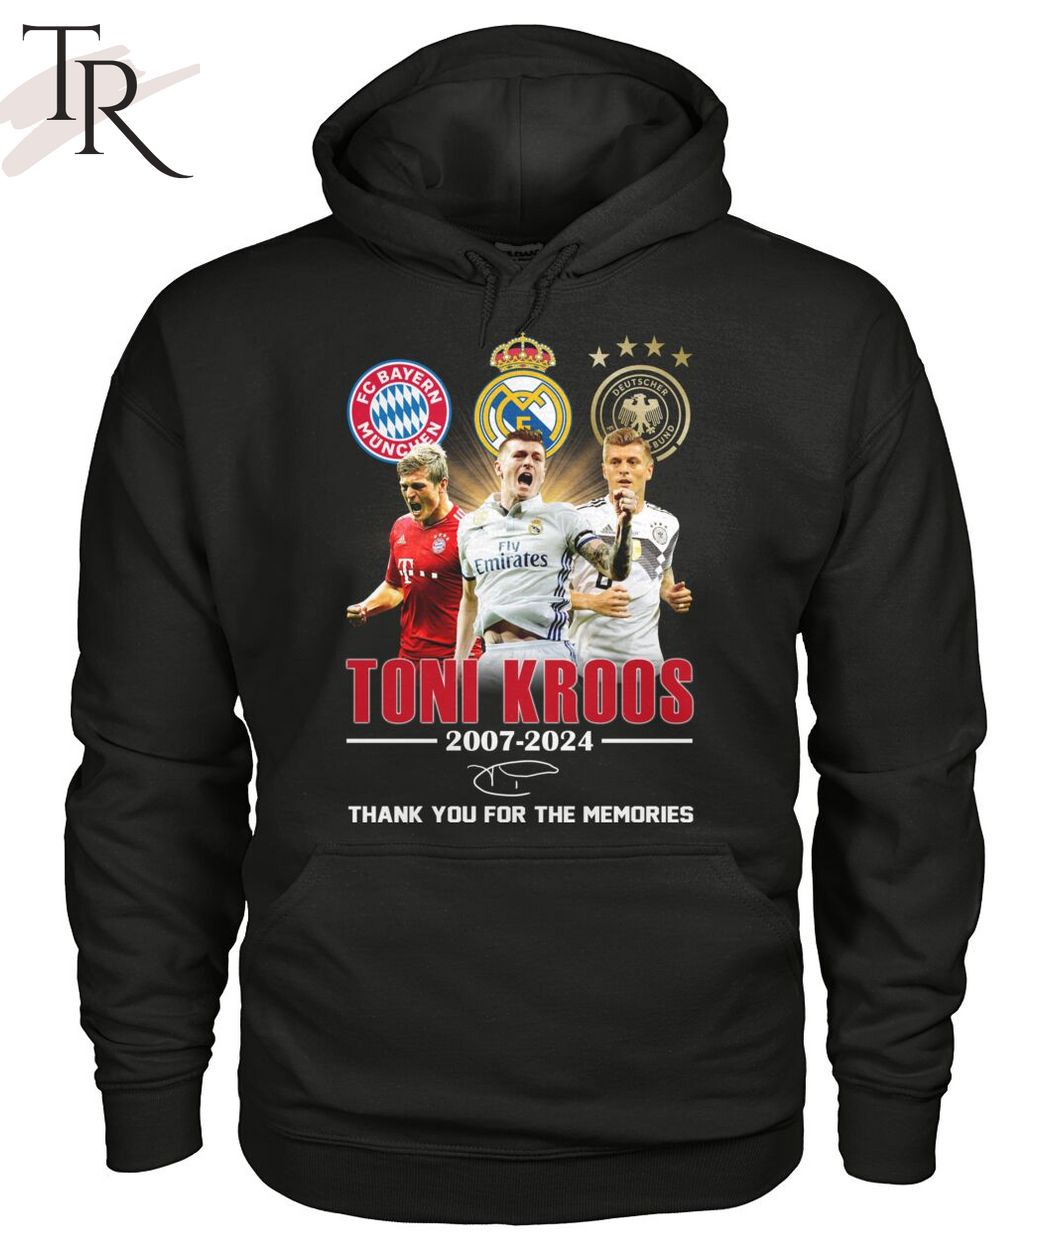 Toni Kroos 2007-2024 Thank You For The Memories T-Shirt